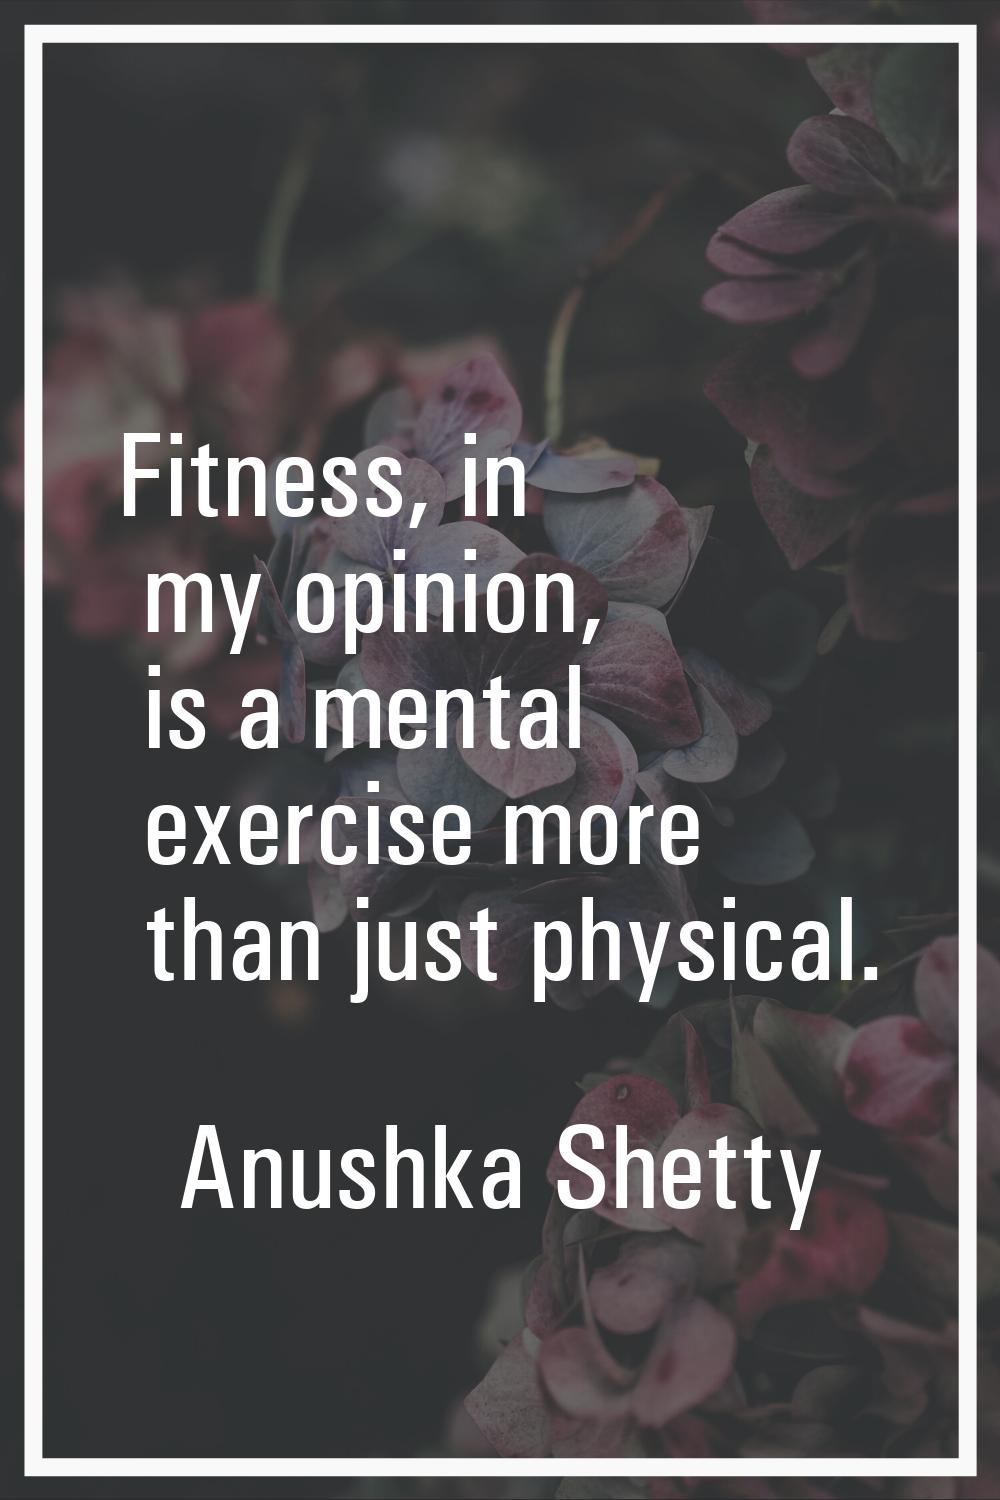 Fitness, in my opinion, is a mental exercise more than just physical.